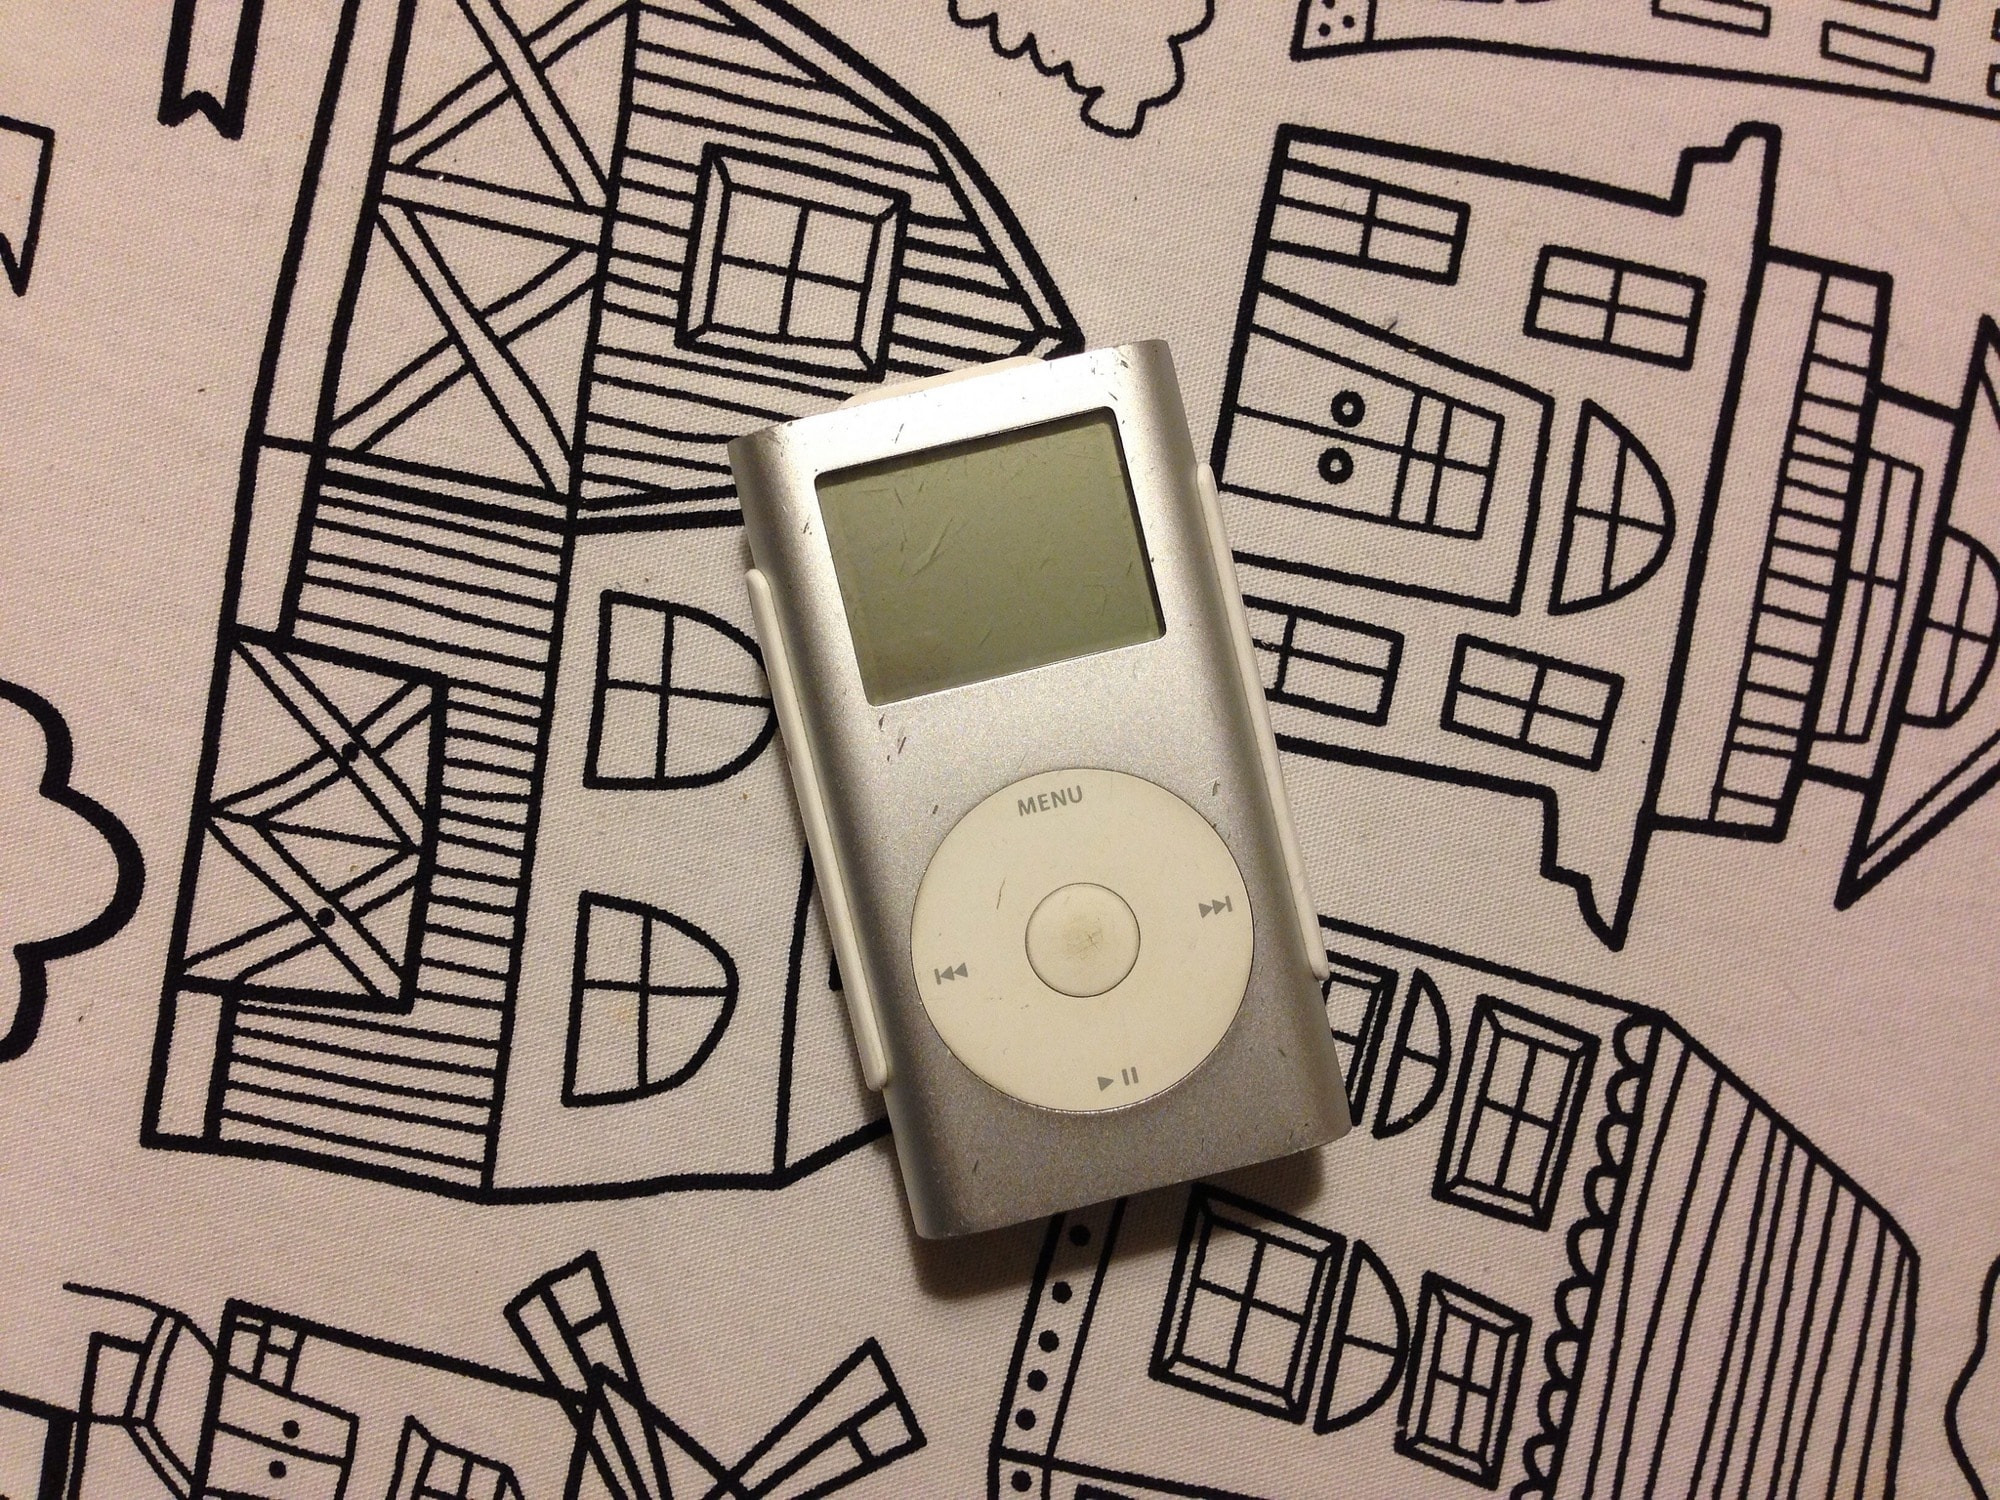 The iPod mini came in lots of colors. Not this one, though.